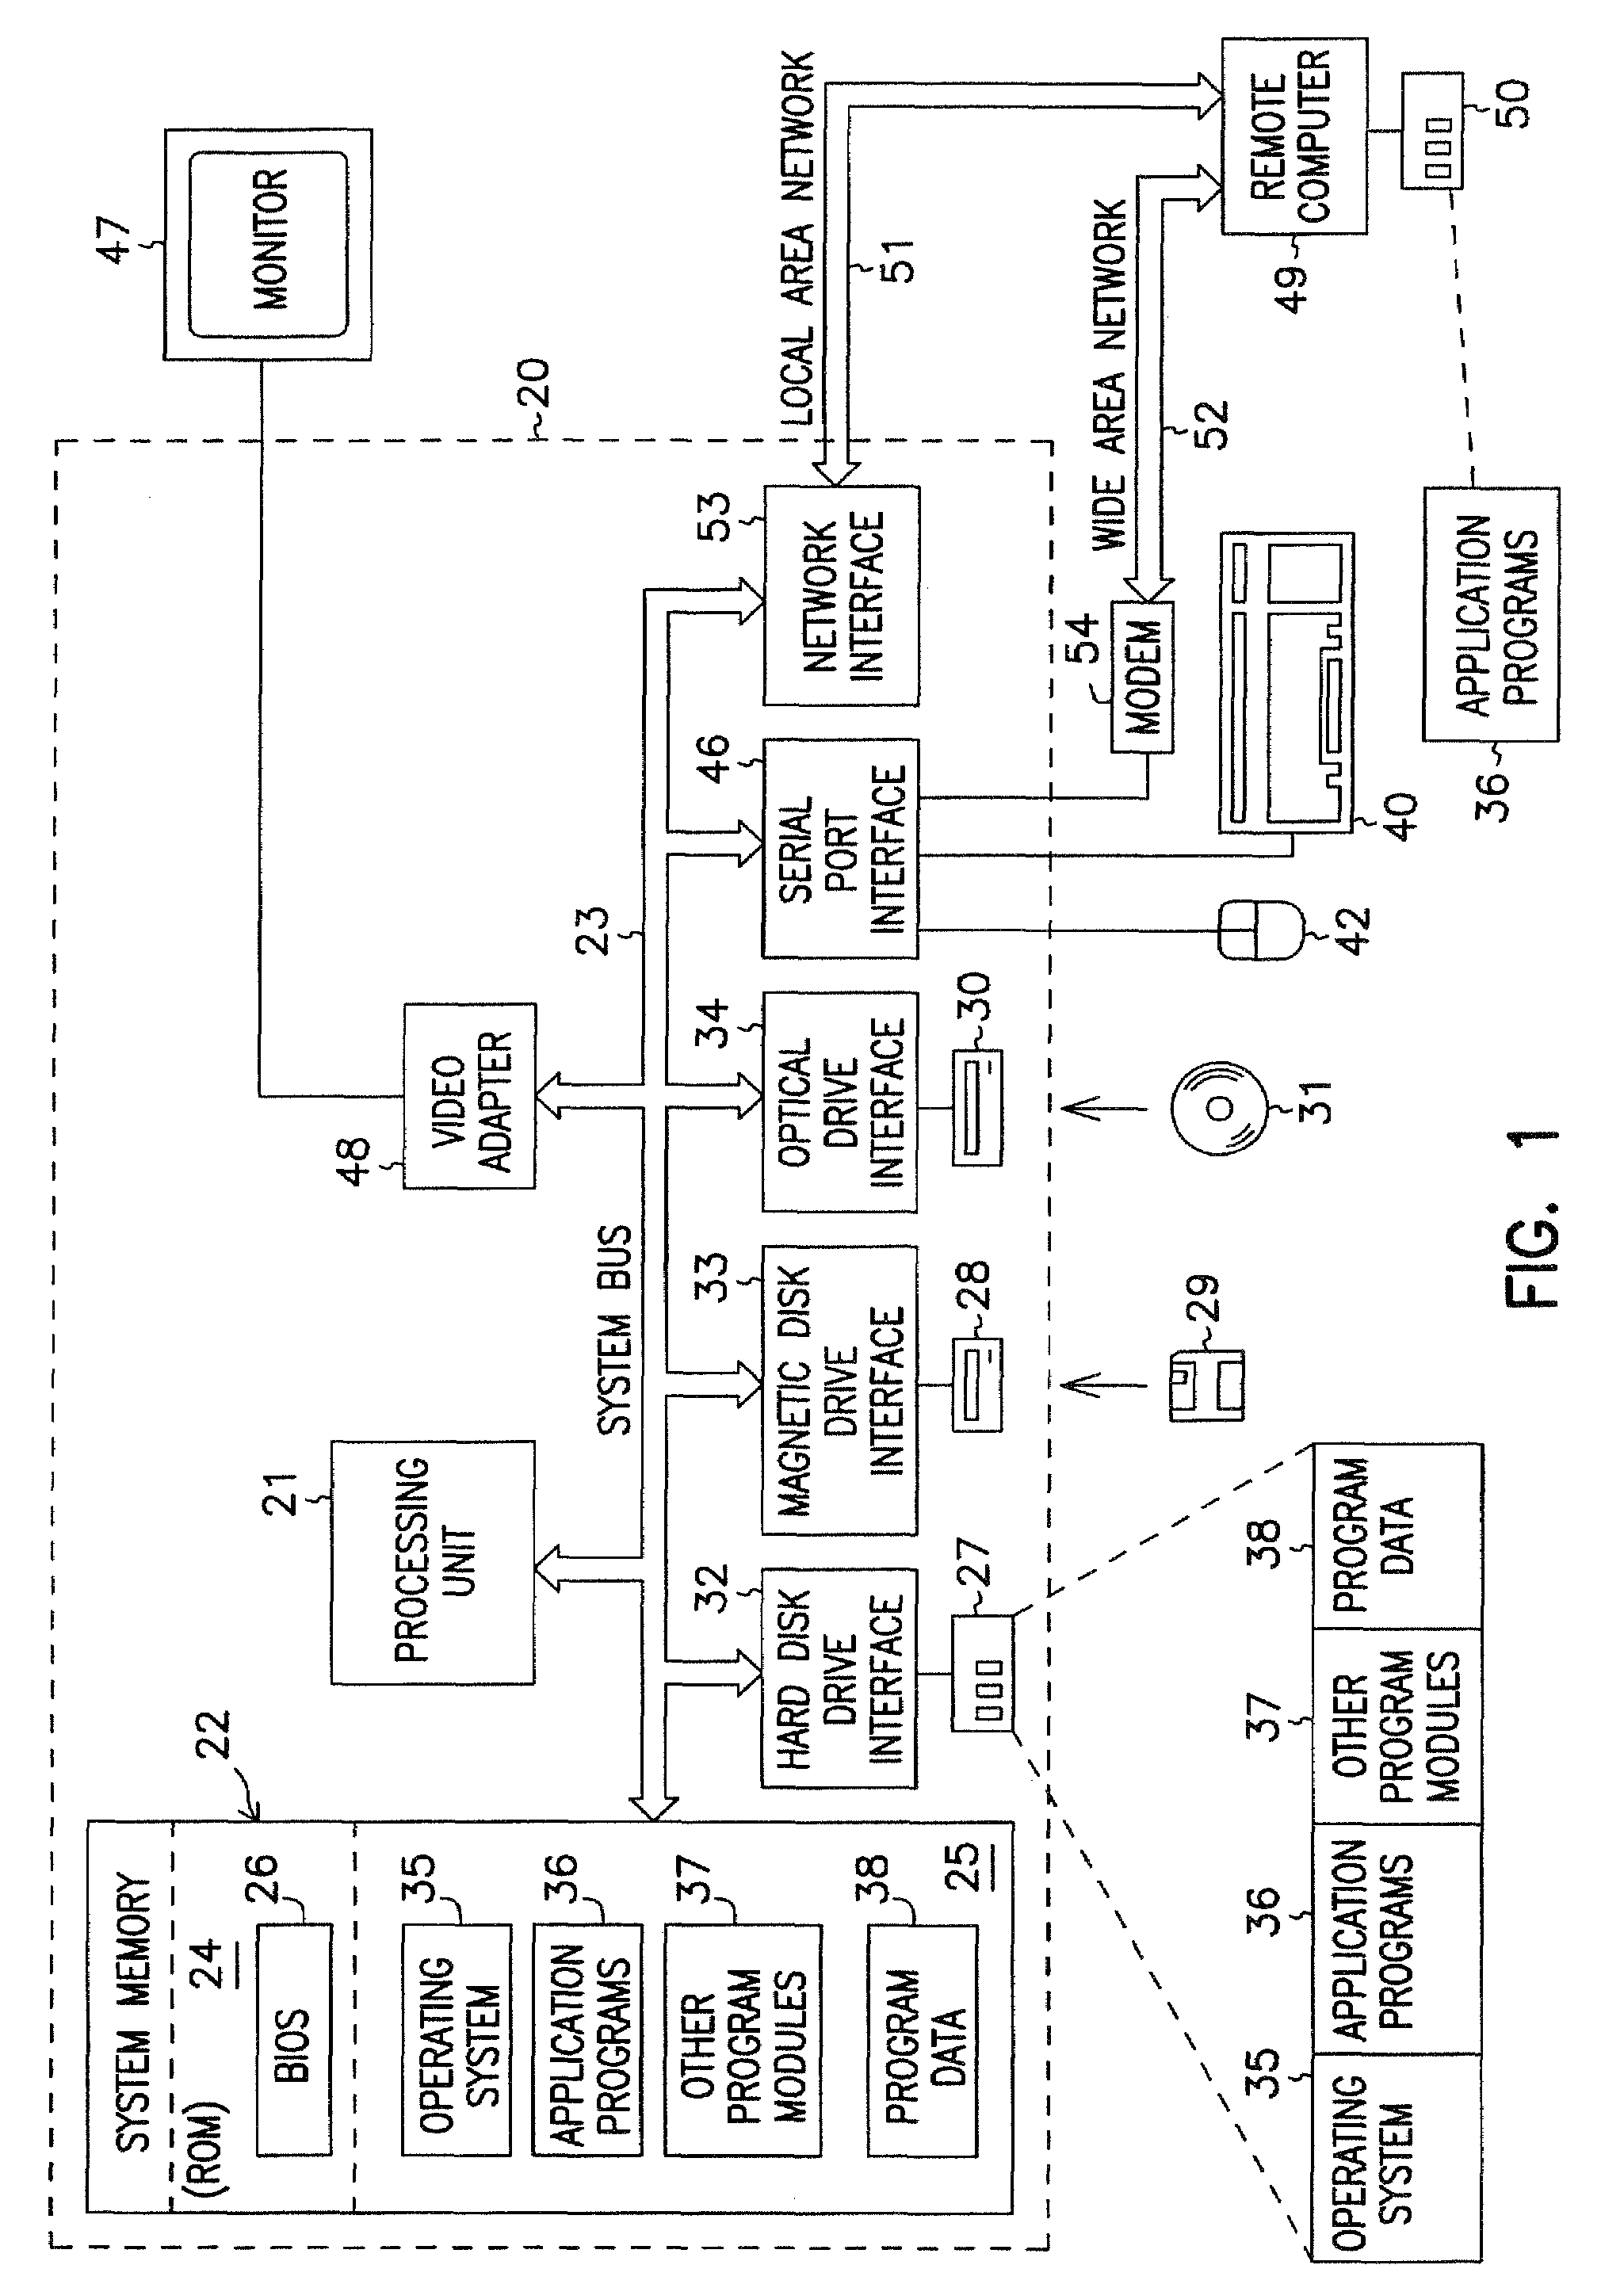 Methods and apparatus for providing coverage for receiver of transmission data